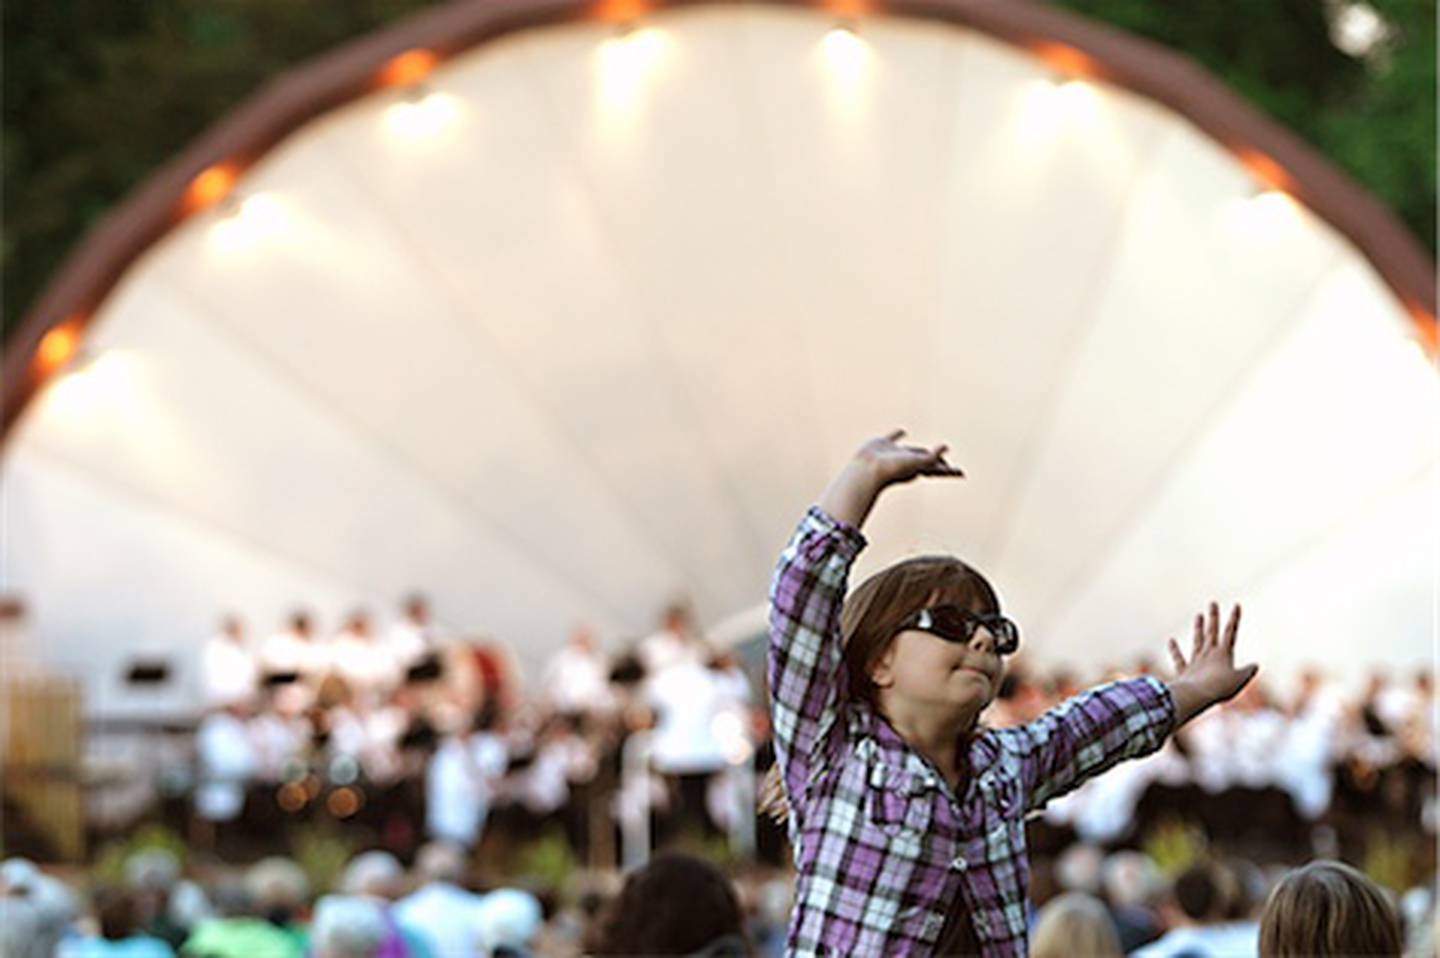 DeKalb resident Zarina Grych, 10, dances Tuesday to a music selection from the "Wizard of Oz" as the DeKalb Municipal Band plays for the first time this year at Hopkins Park in DeKalb.